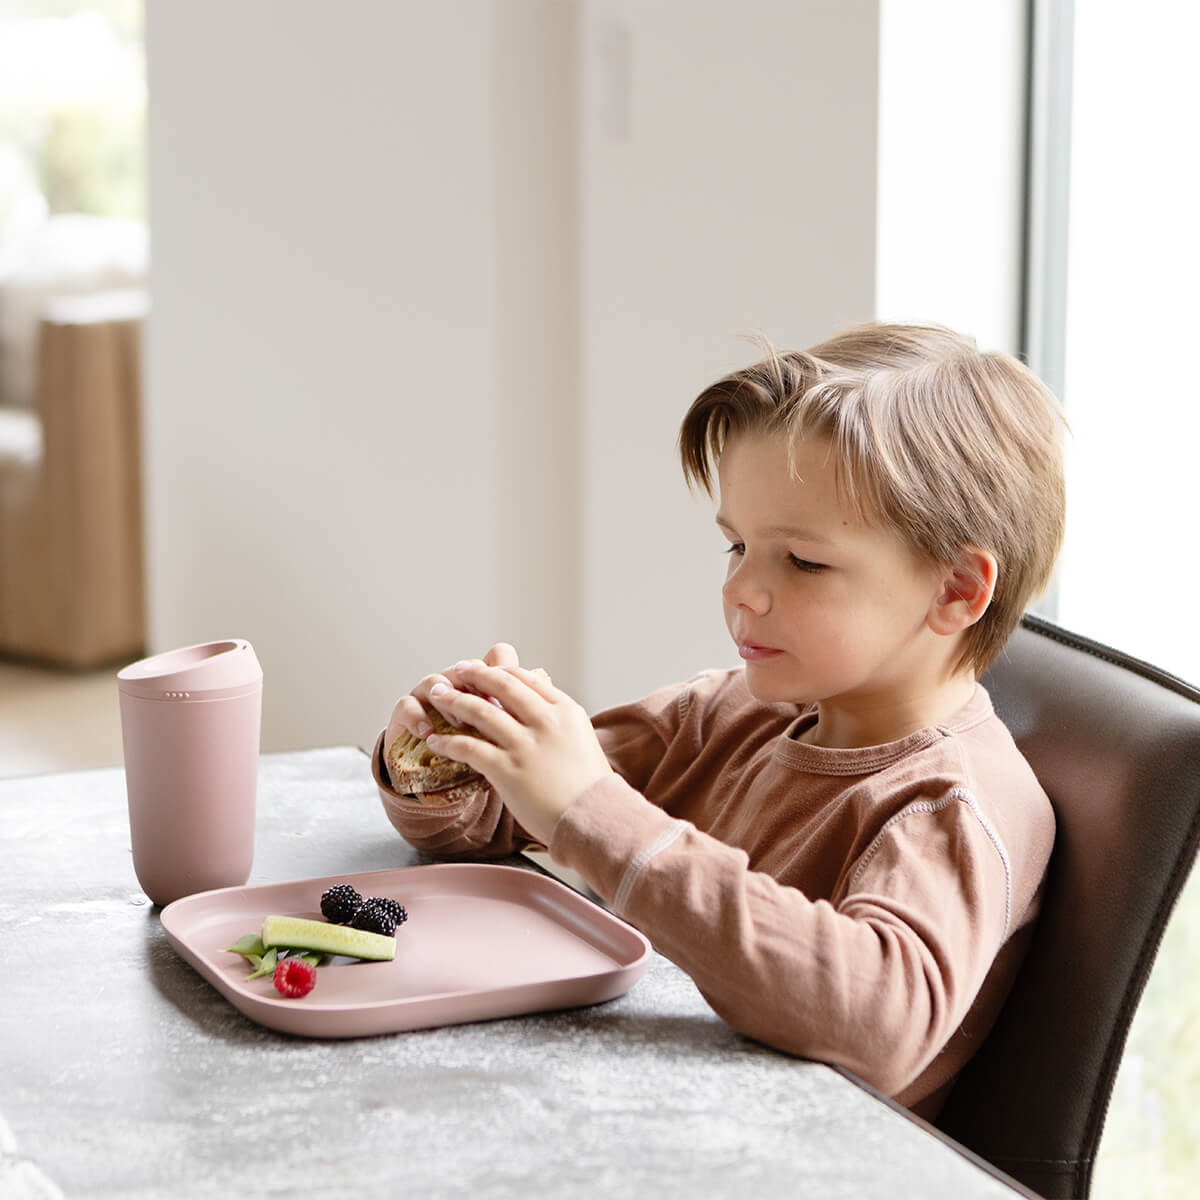 Mealtime Plate in Blush / ezpz Basics Line / Stylish, Durable Plates for Big Kids